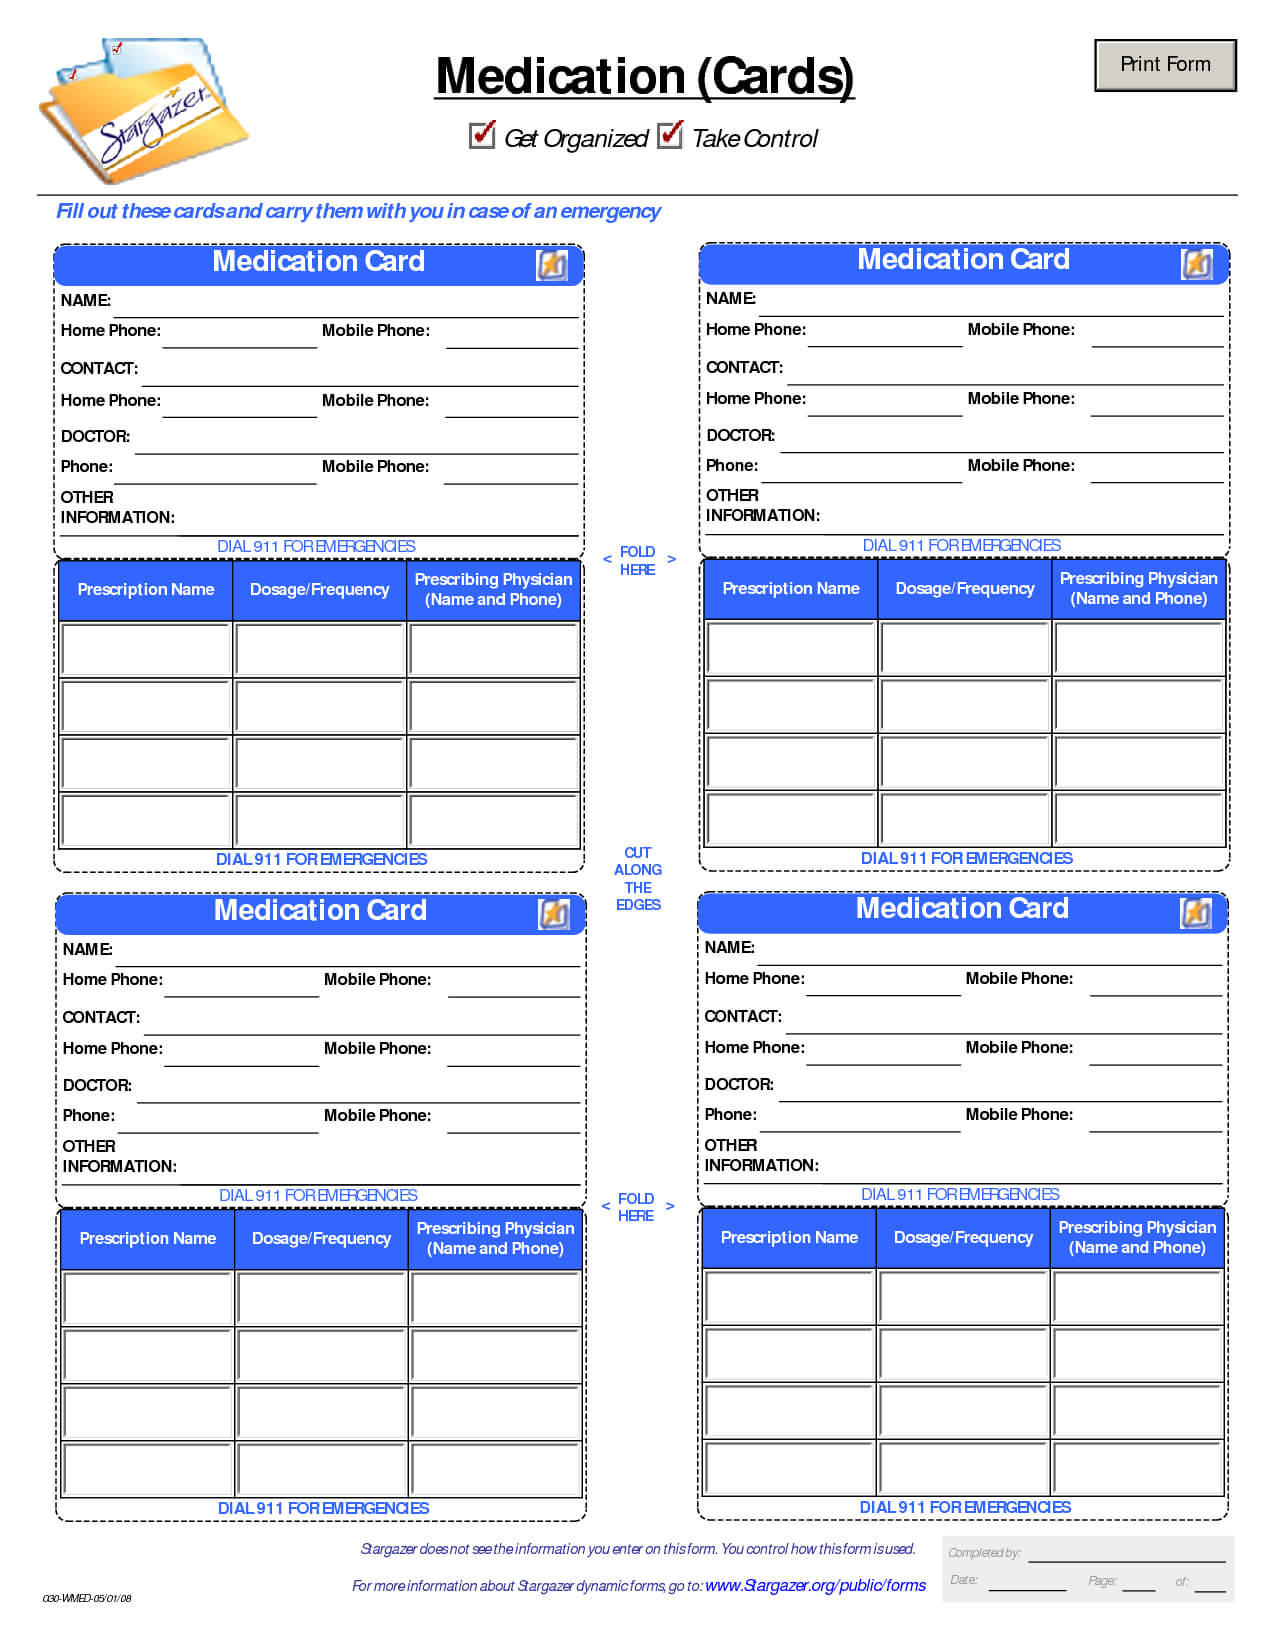 Patient Medication Card Template | Medication List, Medical For Medication Card Template